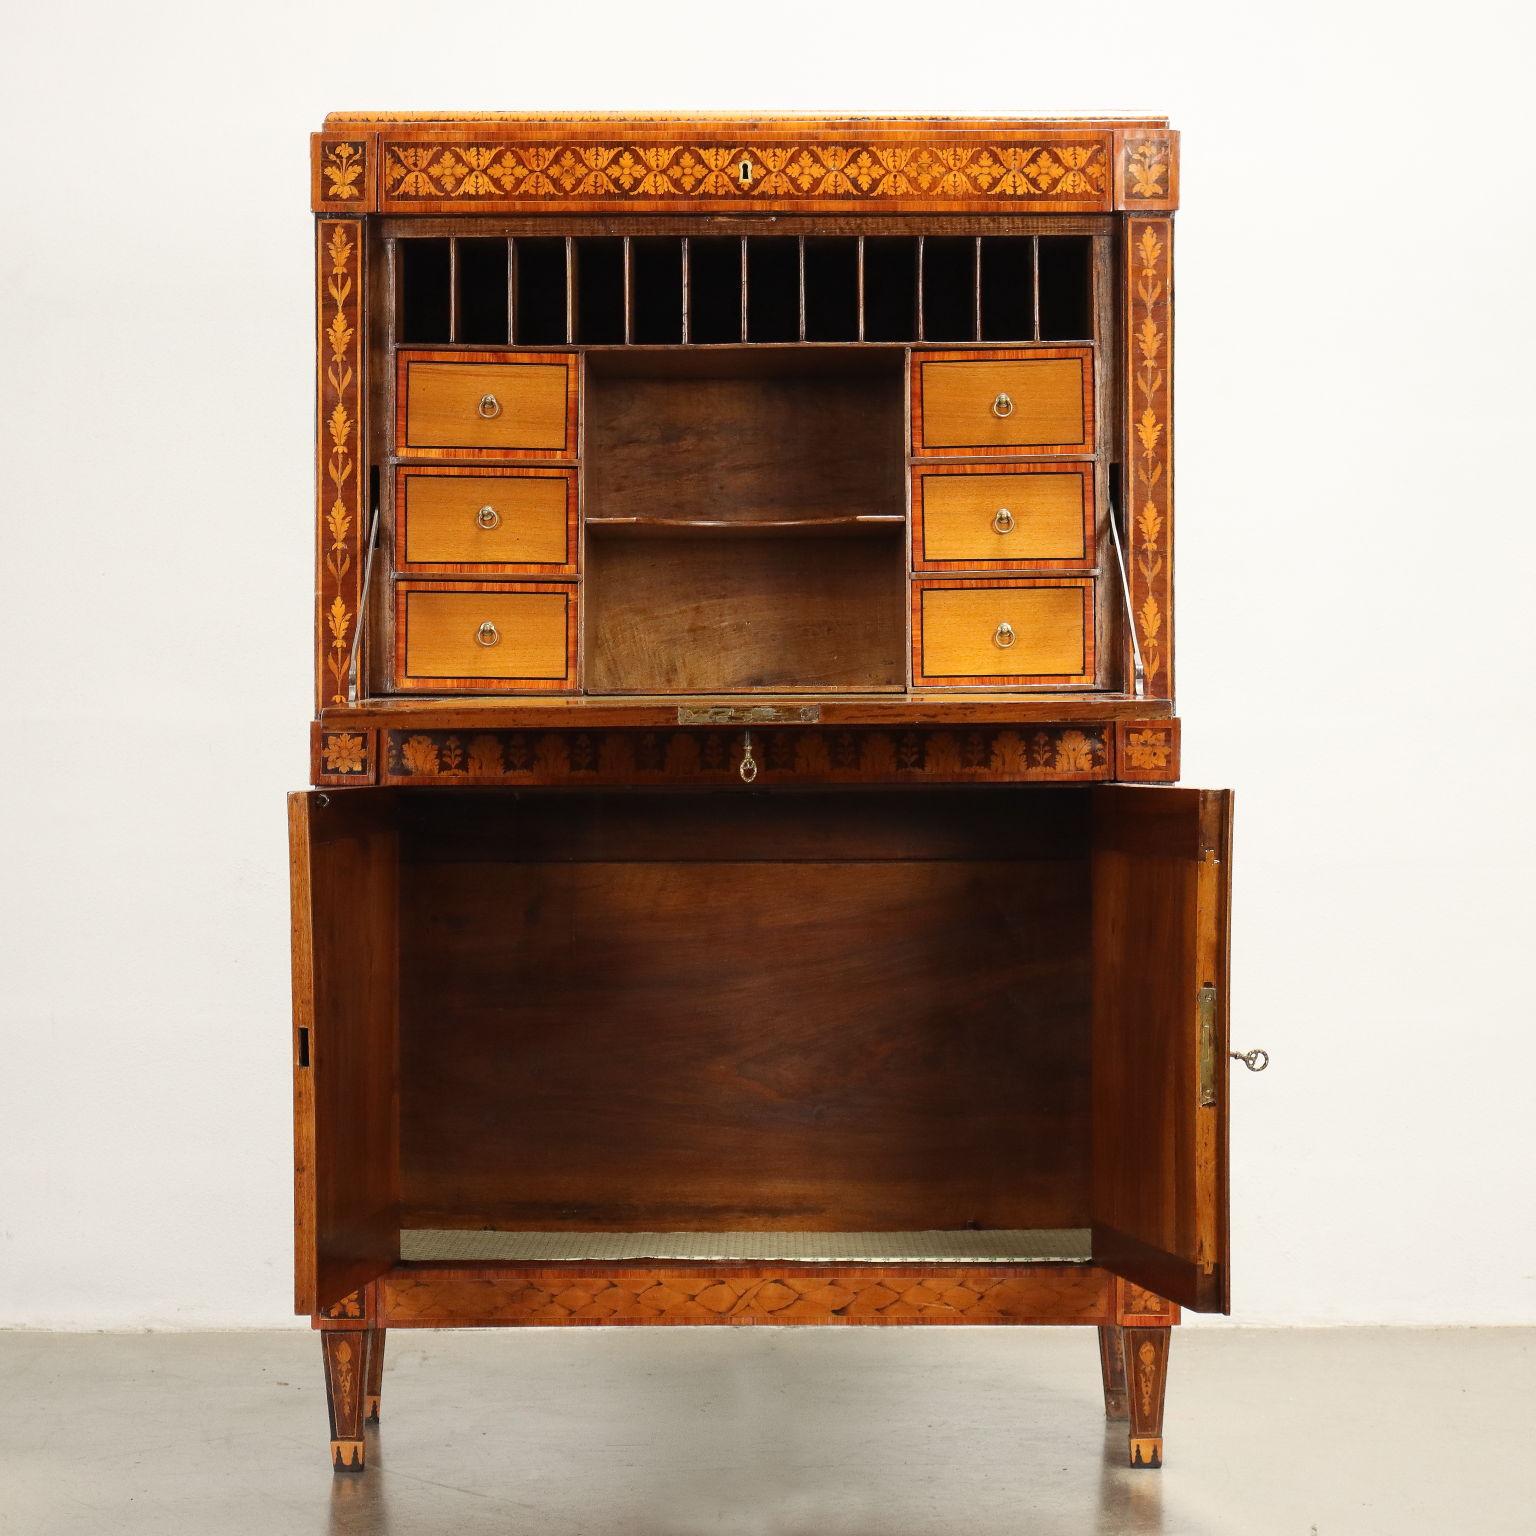 Italian Secrétaire Neoclassical Lombardy Late 18th Century For Sale